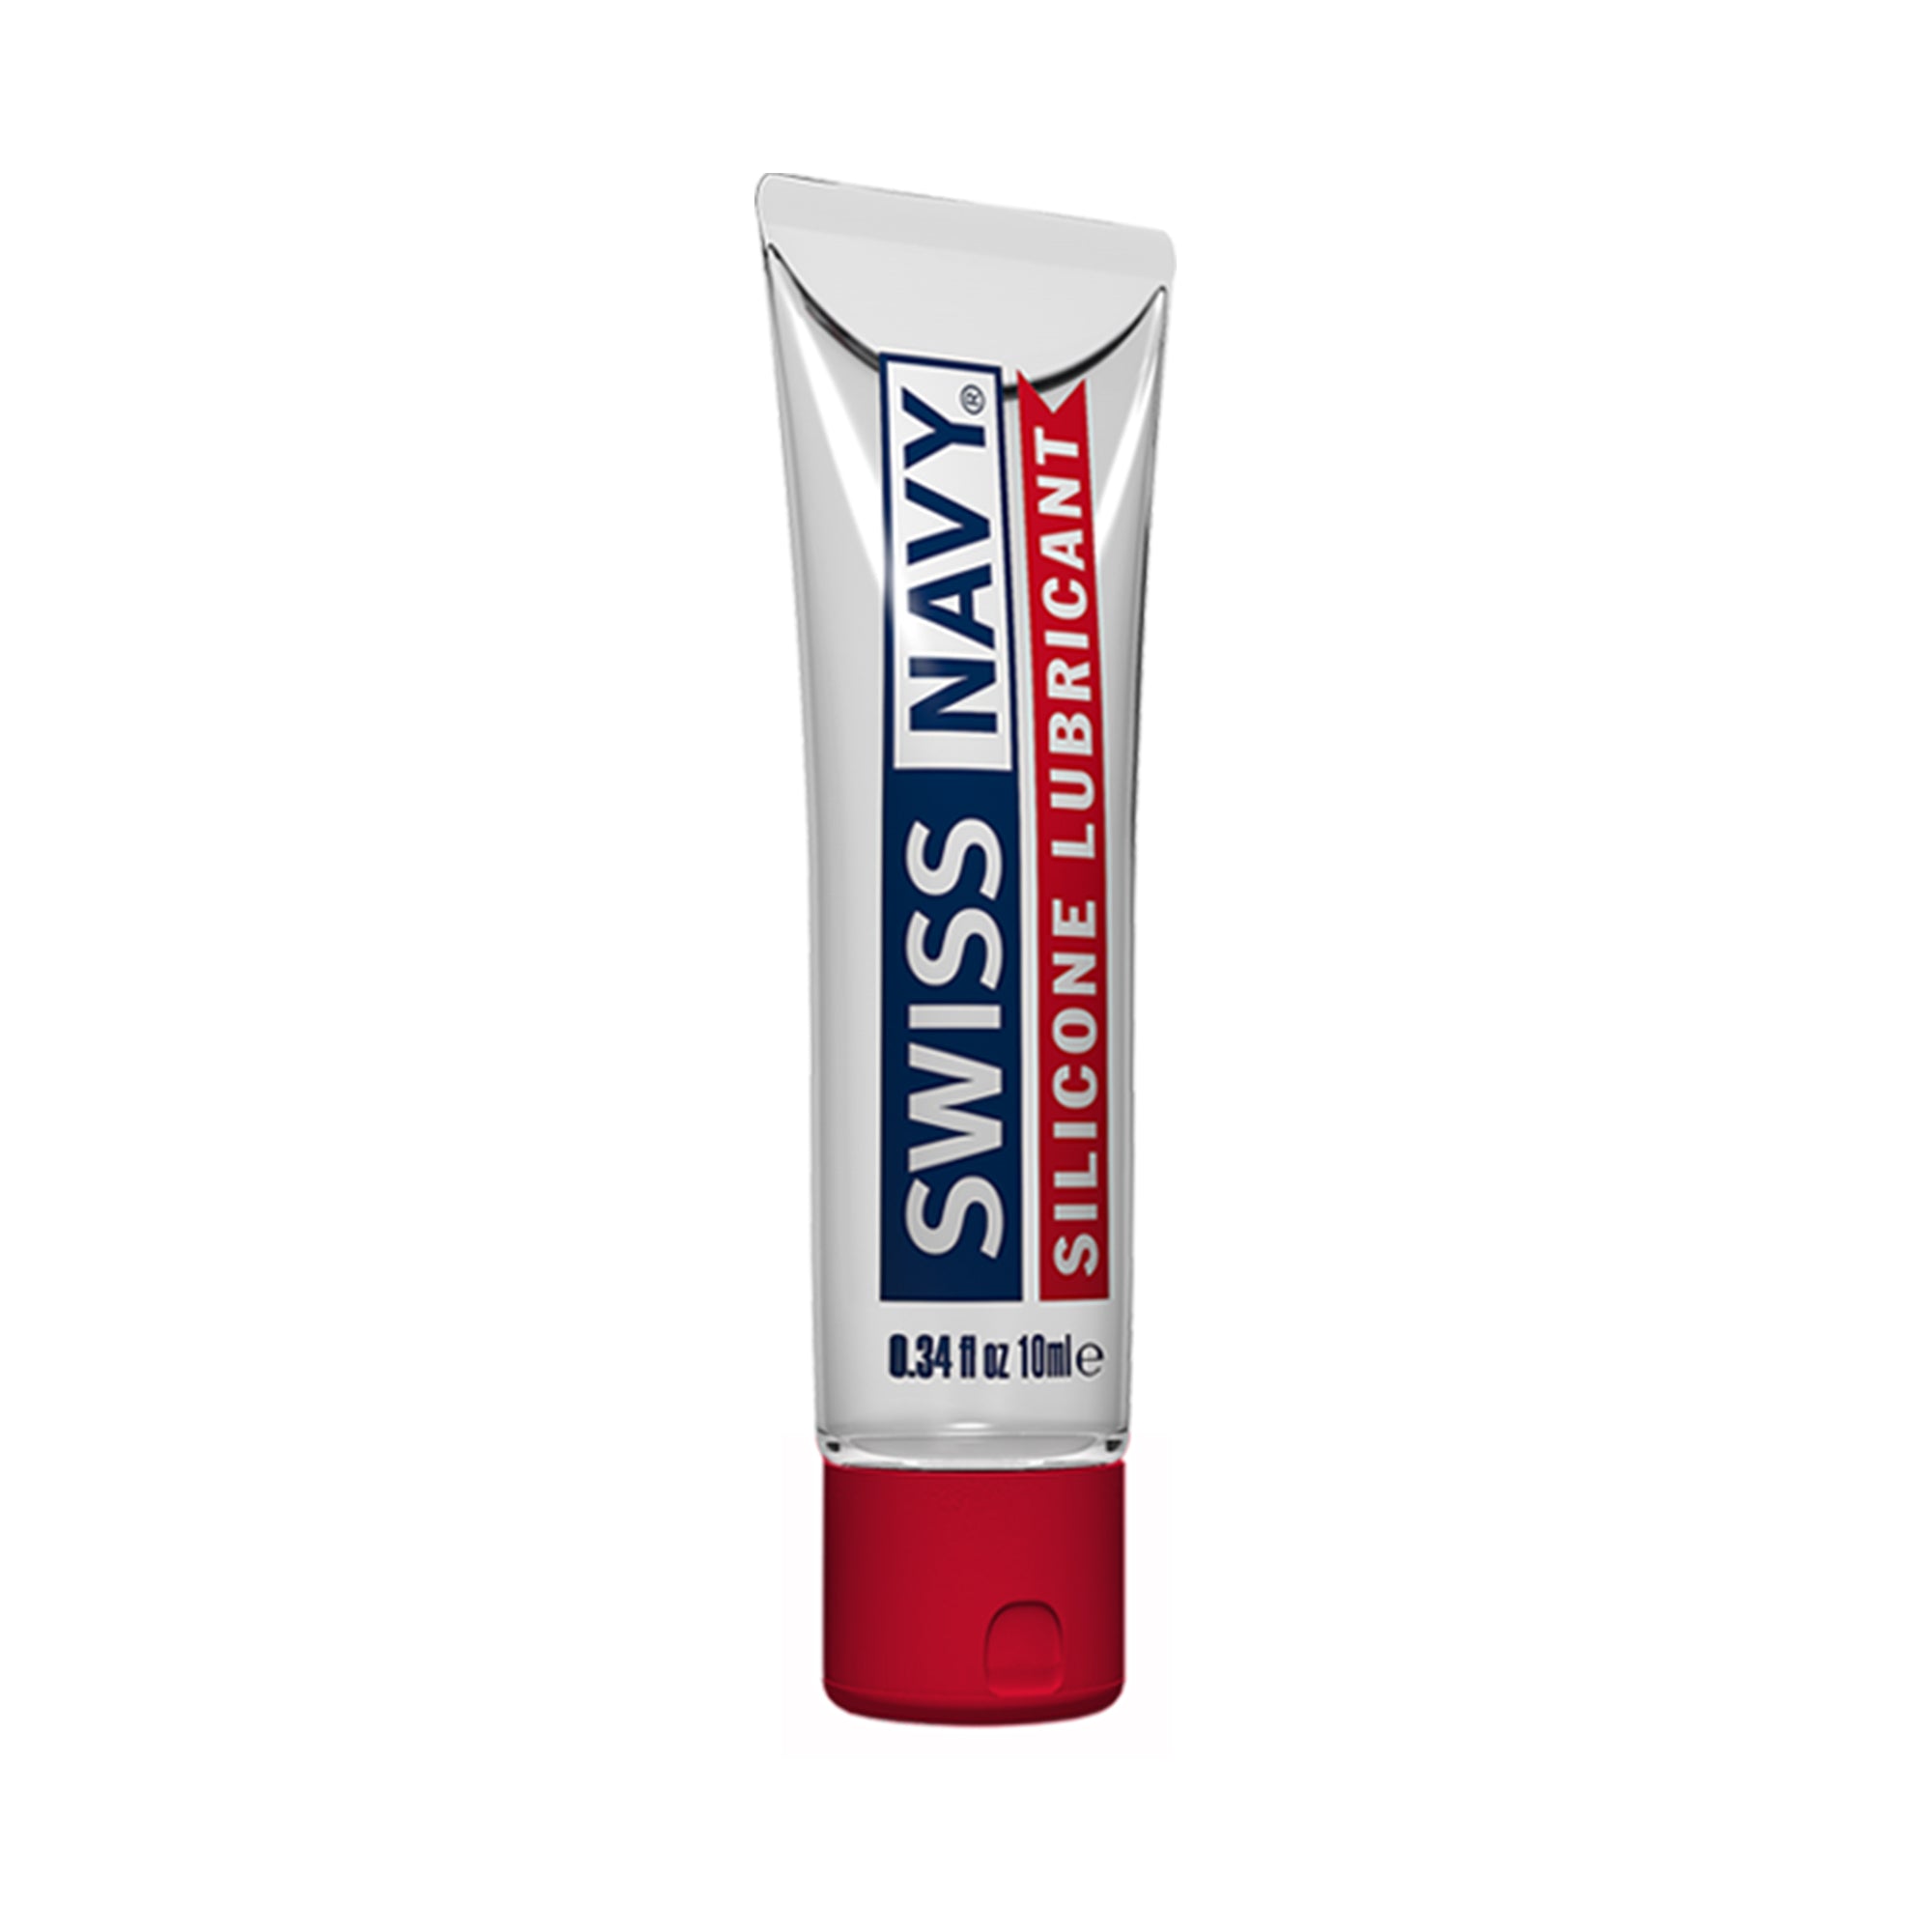 Swiss Navy Silicone Lubricant 10ml